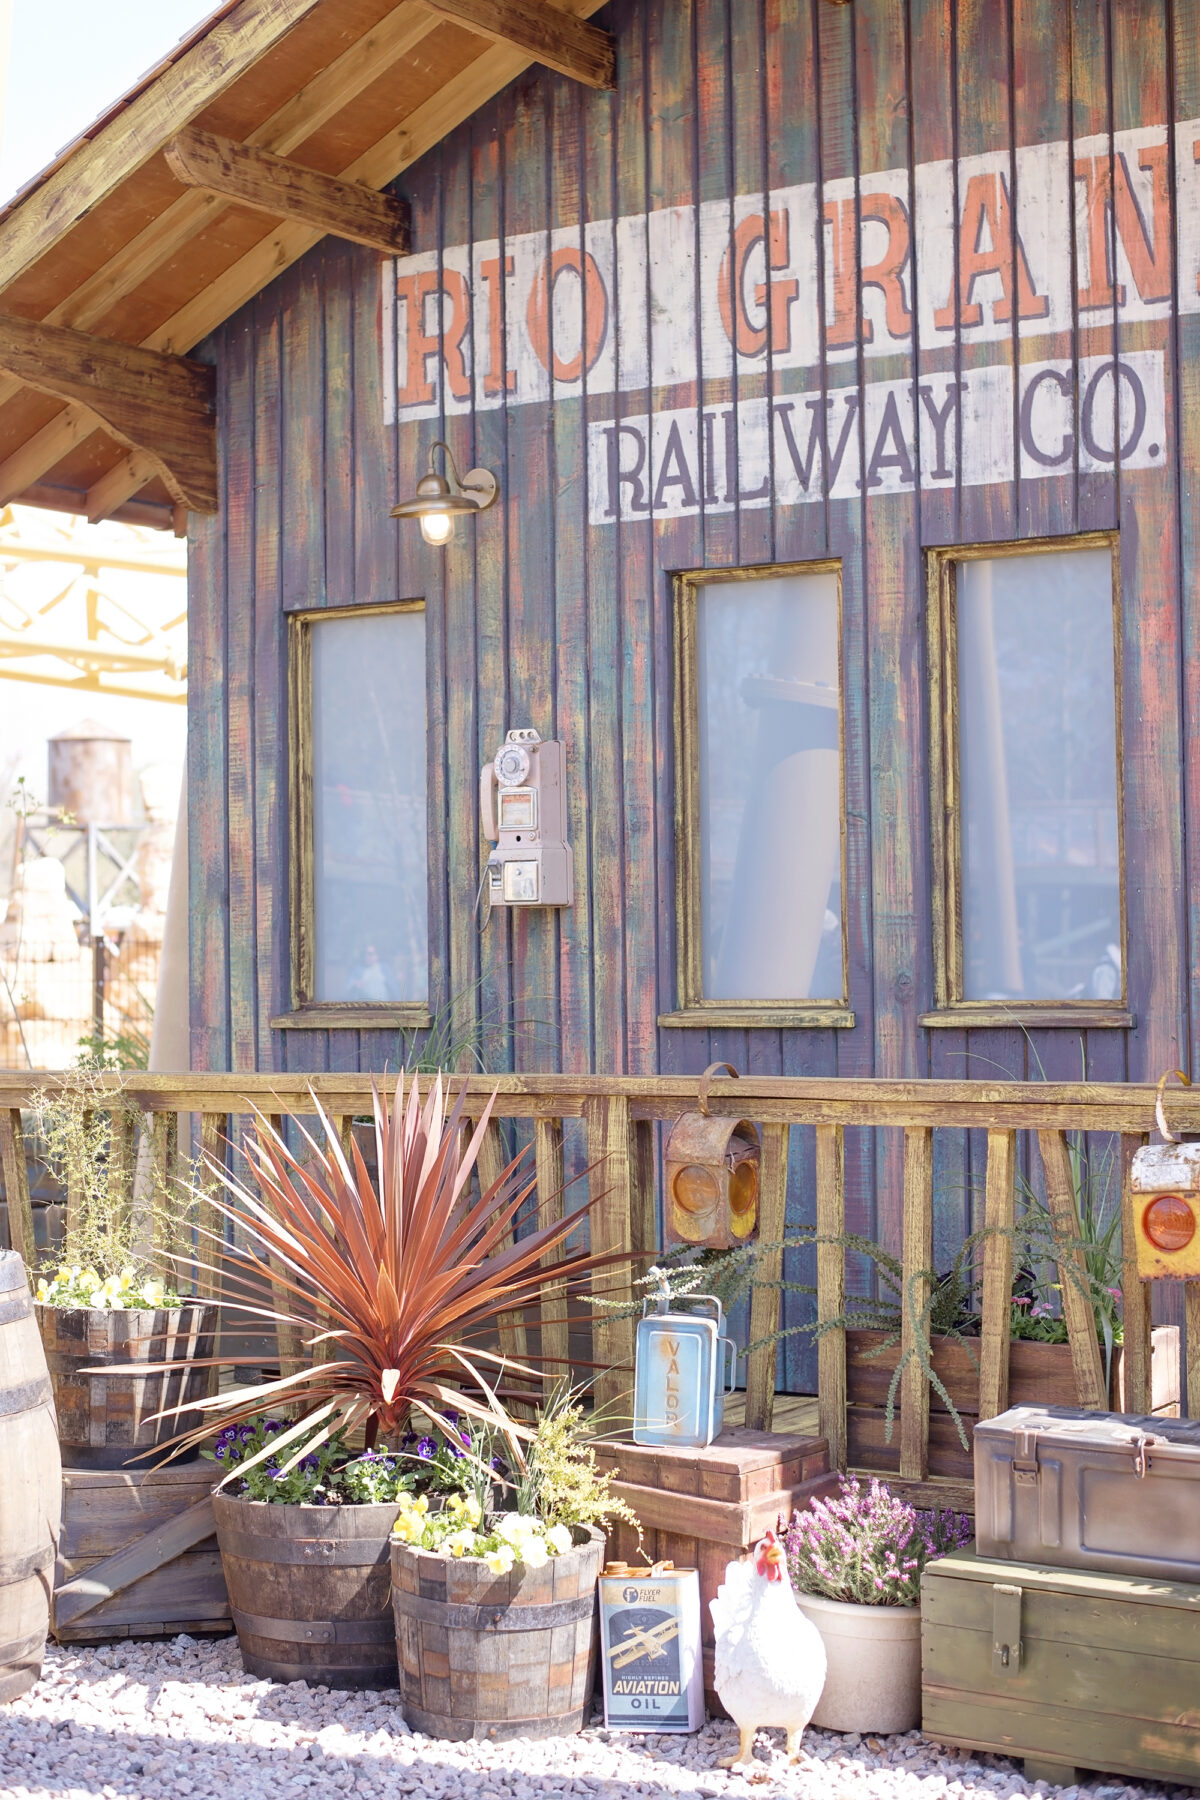 Image shows theming at Paultons Park Tornado Springs area. An american wooden building belonging to the rio grande railway company. There is a white chicken walking on the porch, with flowers in barrels and cans of aviation oil littered next to ammunition cases. 